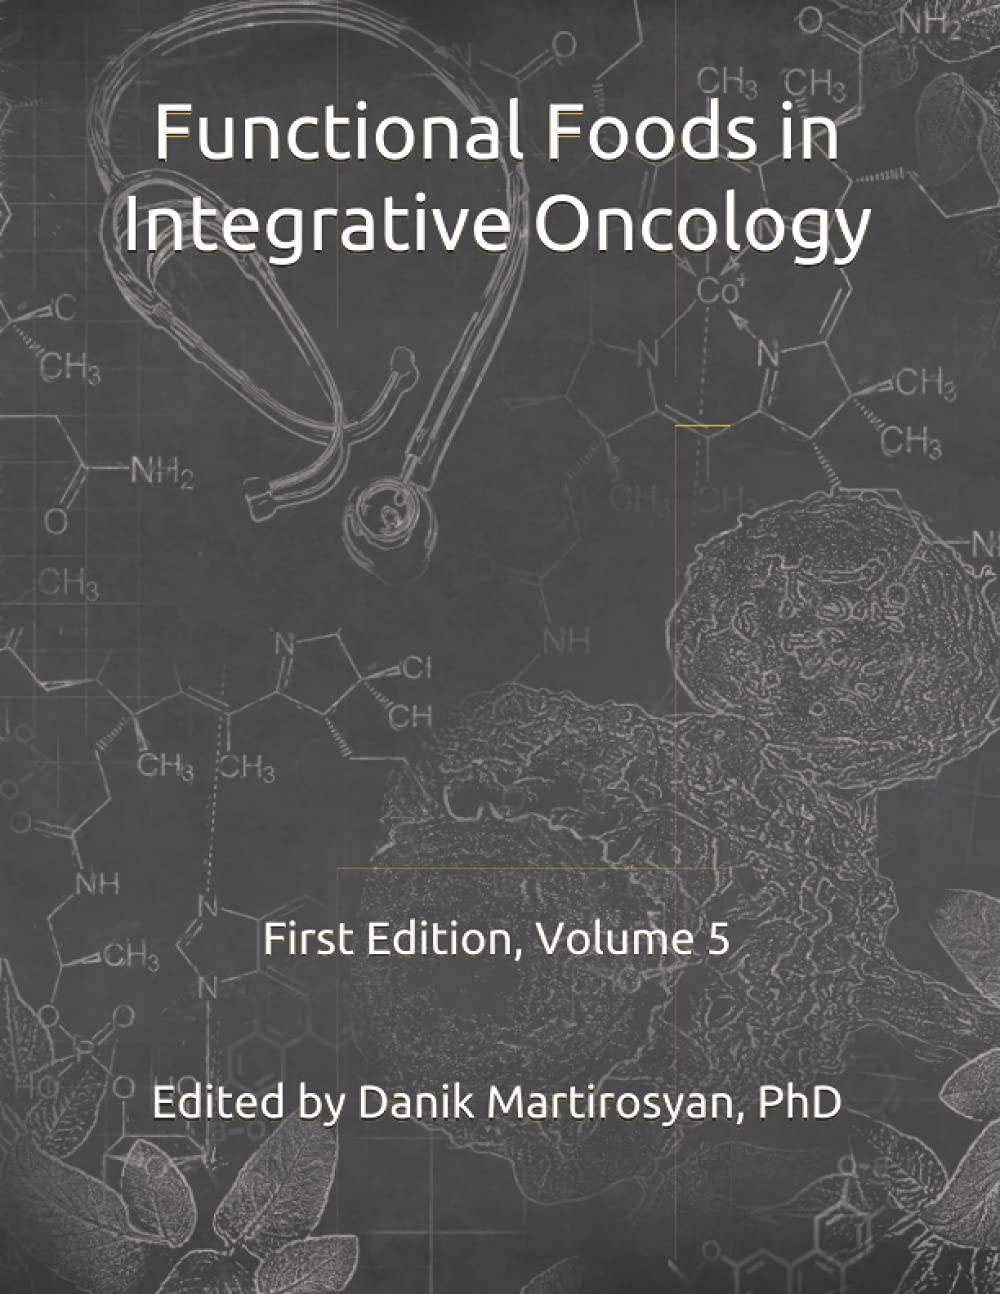 Functional Foods and Cancer: Functional Foods in Integrative Oncology: Volume 5, First Edition (Functional Food Science)